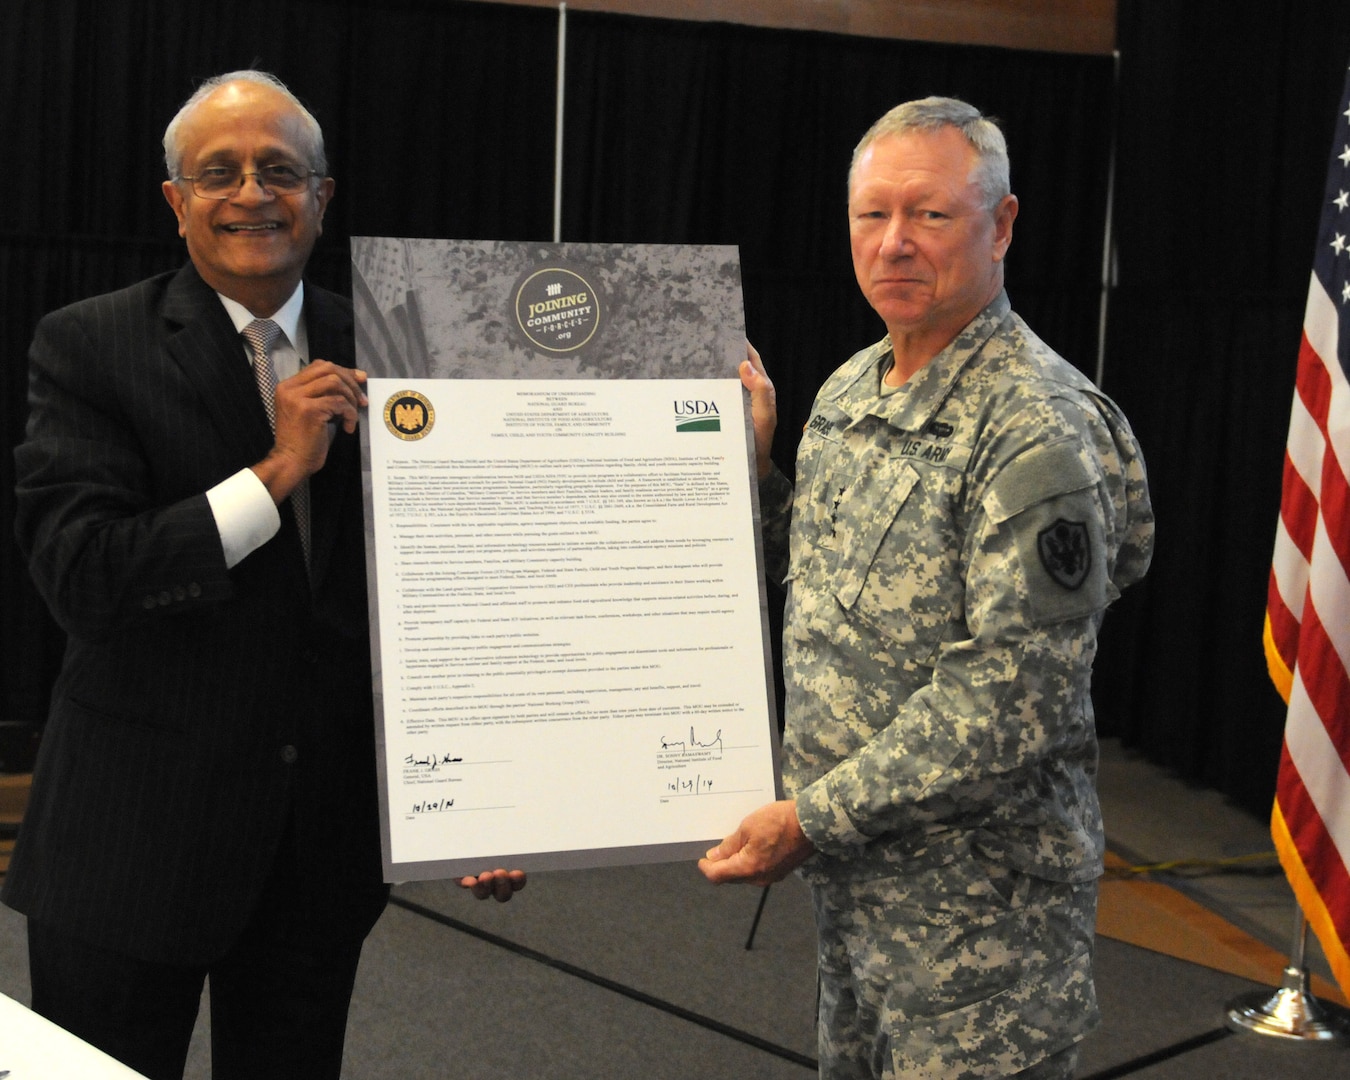 Army Gen. Frank Grass, chief of the National Guard Bureau and Sonny Ramaswamy, director, National Institute of Food and Agriculture, stand together after signing a Memorandum of Understanding, which is designed to assist National Guard families, Camp Dawson, W. Va., Oct. 29, 2014. The memorandum of understanding was signed to connect the two organizations to better enhance the health and well-being of military families.